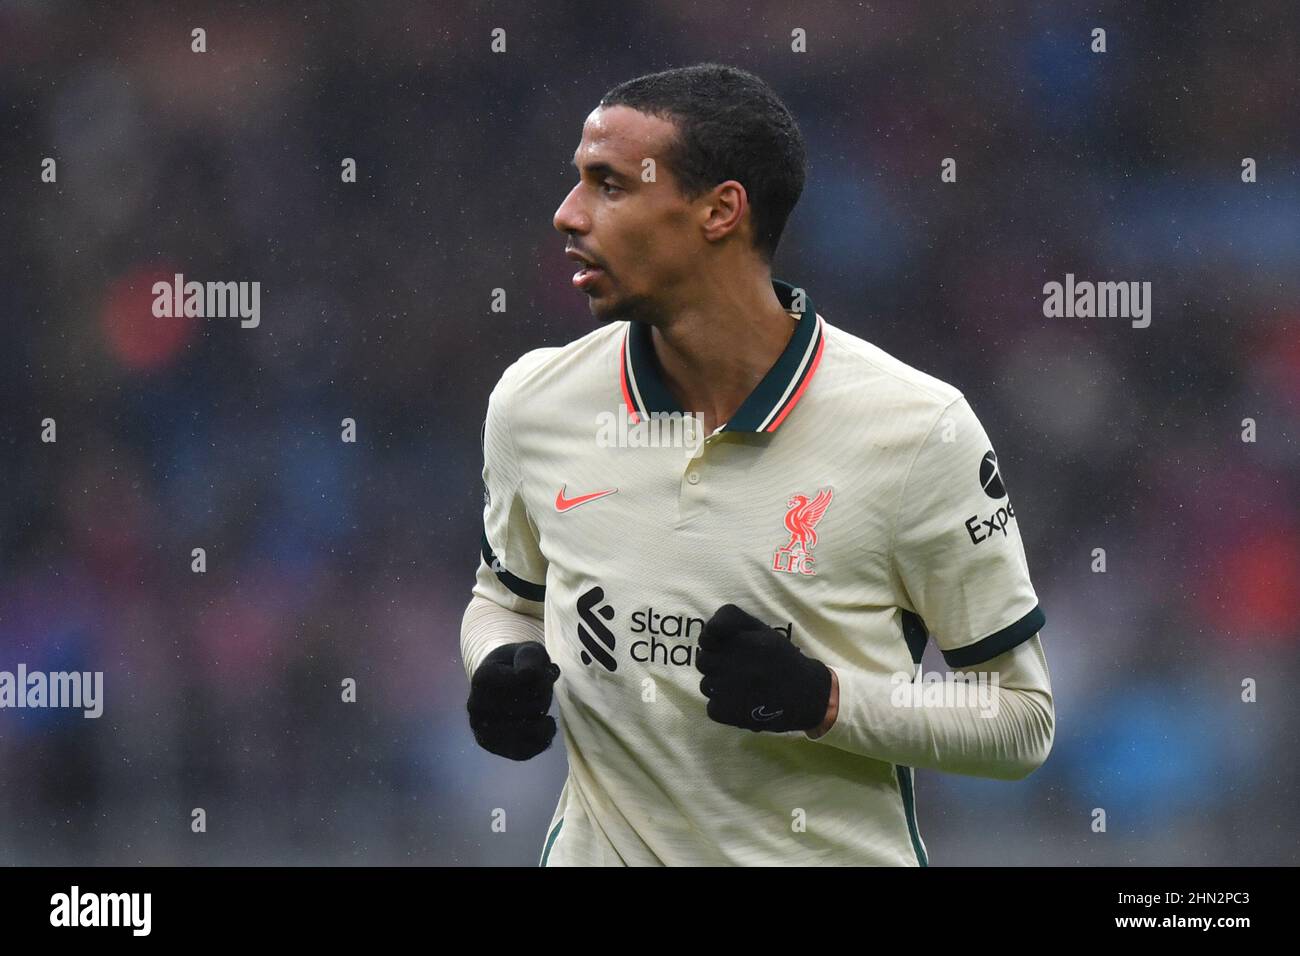 Burnley, UK. 13th Feb, 2022. Liverpool's Joel Matip during the Premier League match at Turf Moor, Burnley, UK. Picture date: Sunday February 13, 2022. Photo credit should read: Anthony Devlin Credit: Anthony Devlin/Alamy Live News Stock Photo